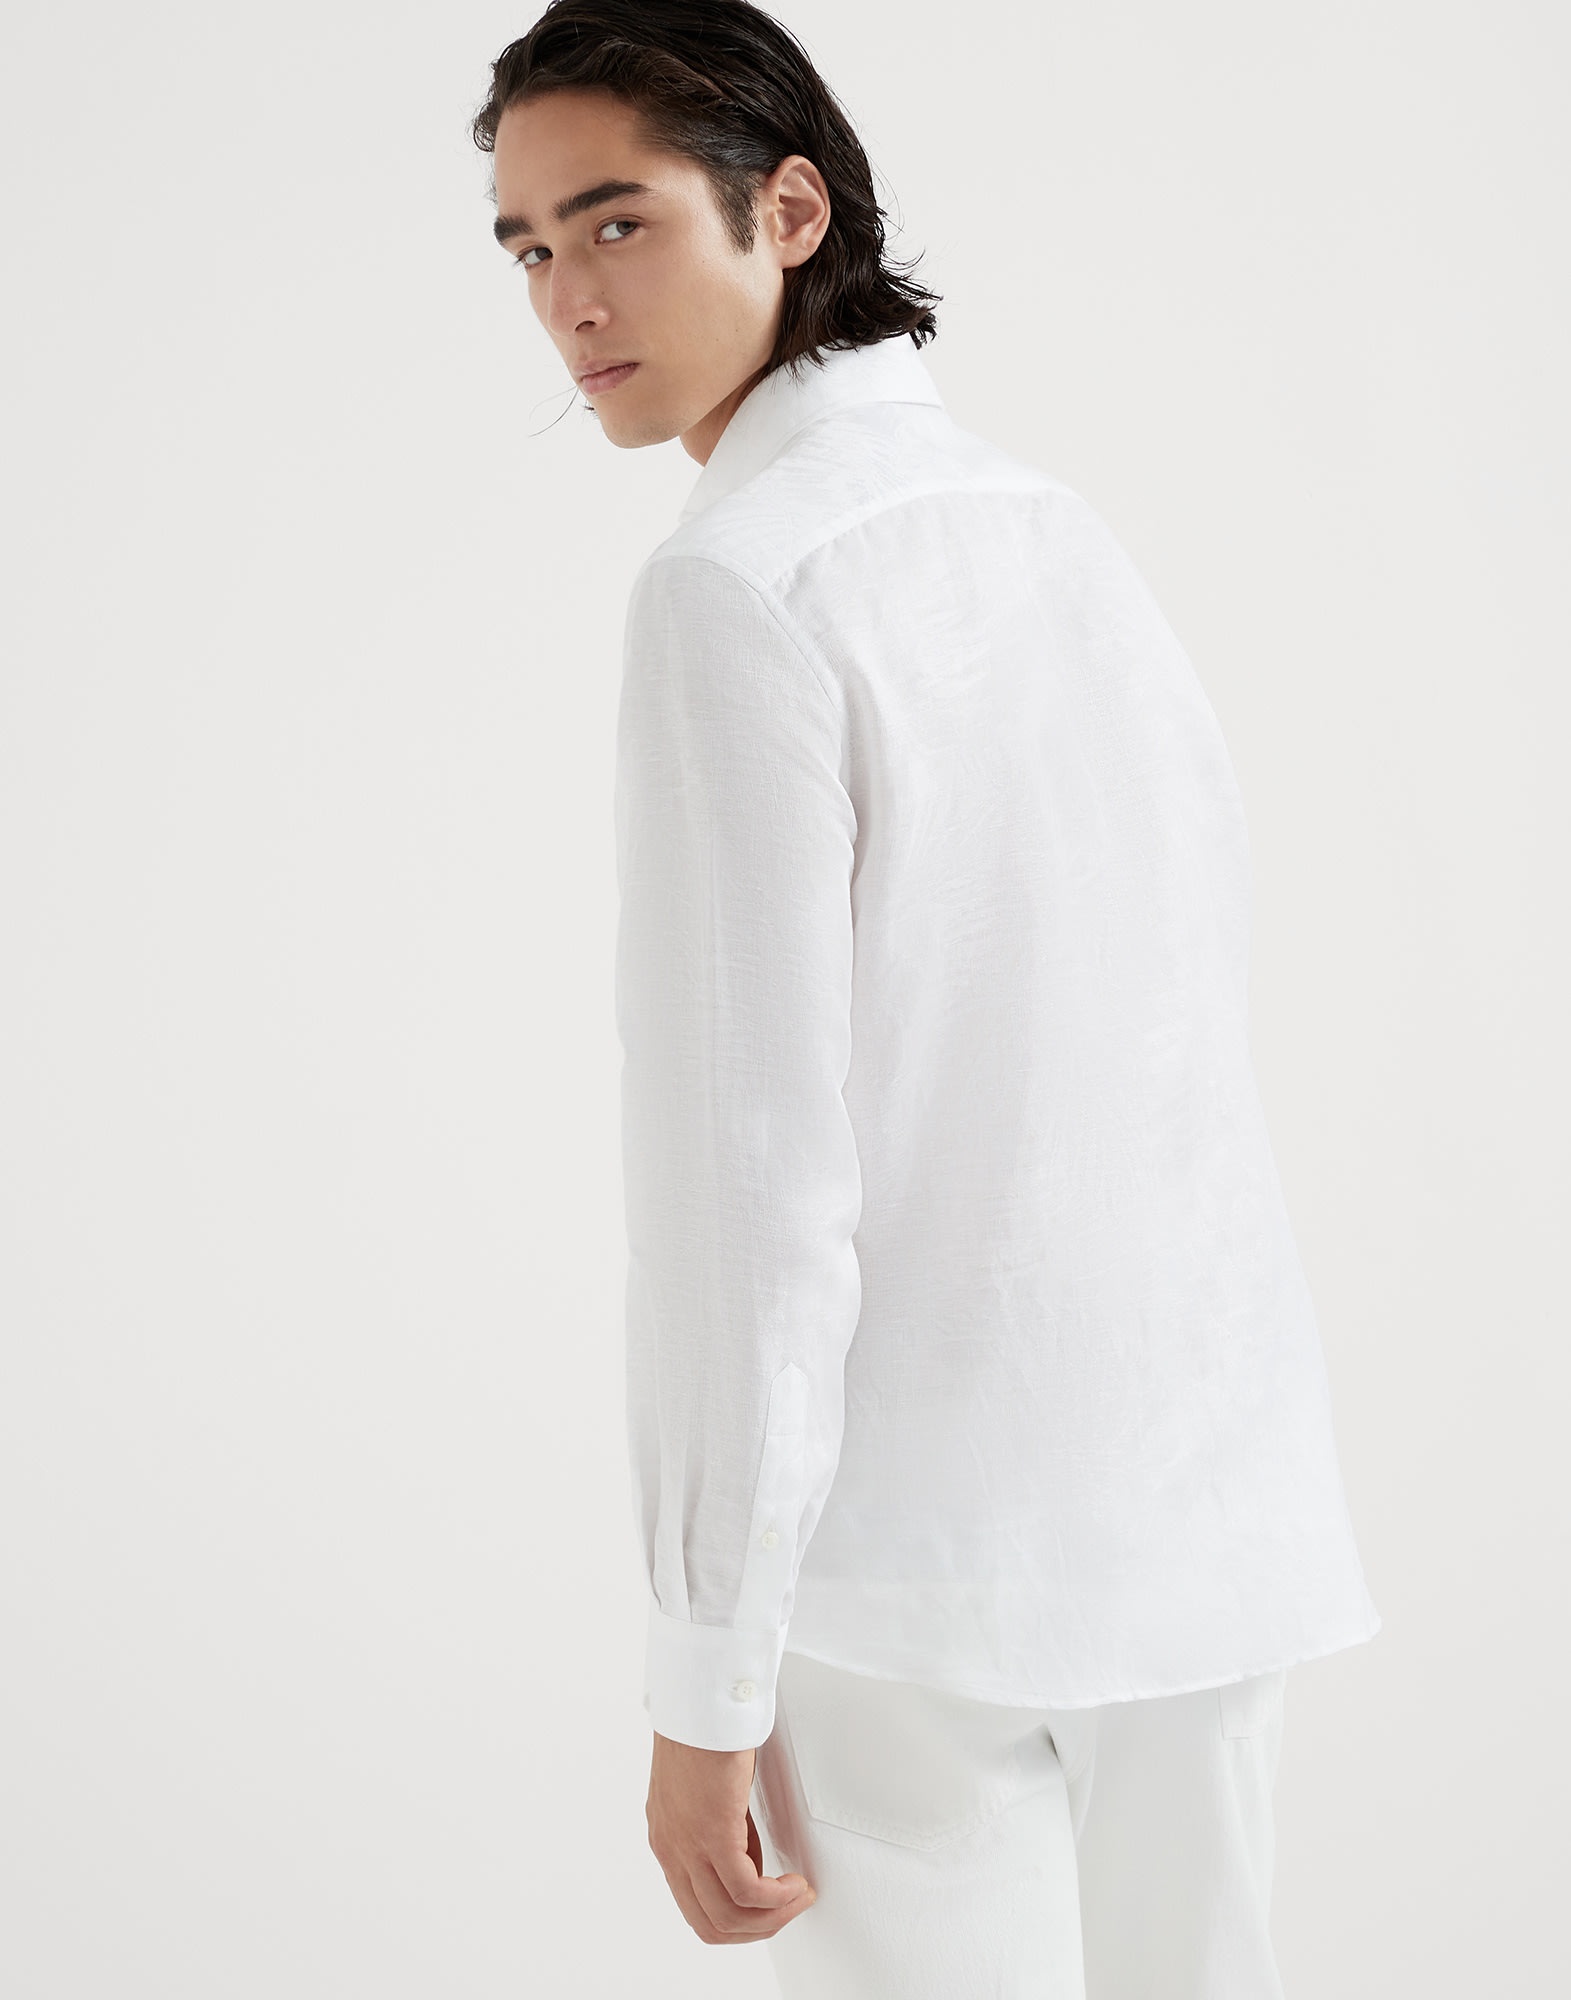 Palm Jacquard linen and cotton easy fit shirt with spread collar - 2